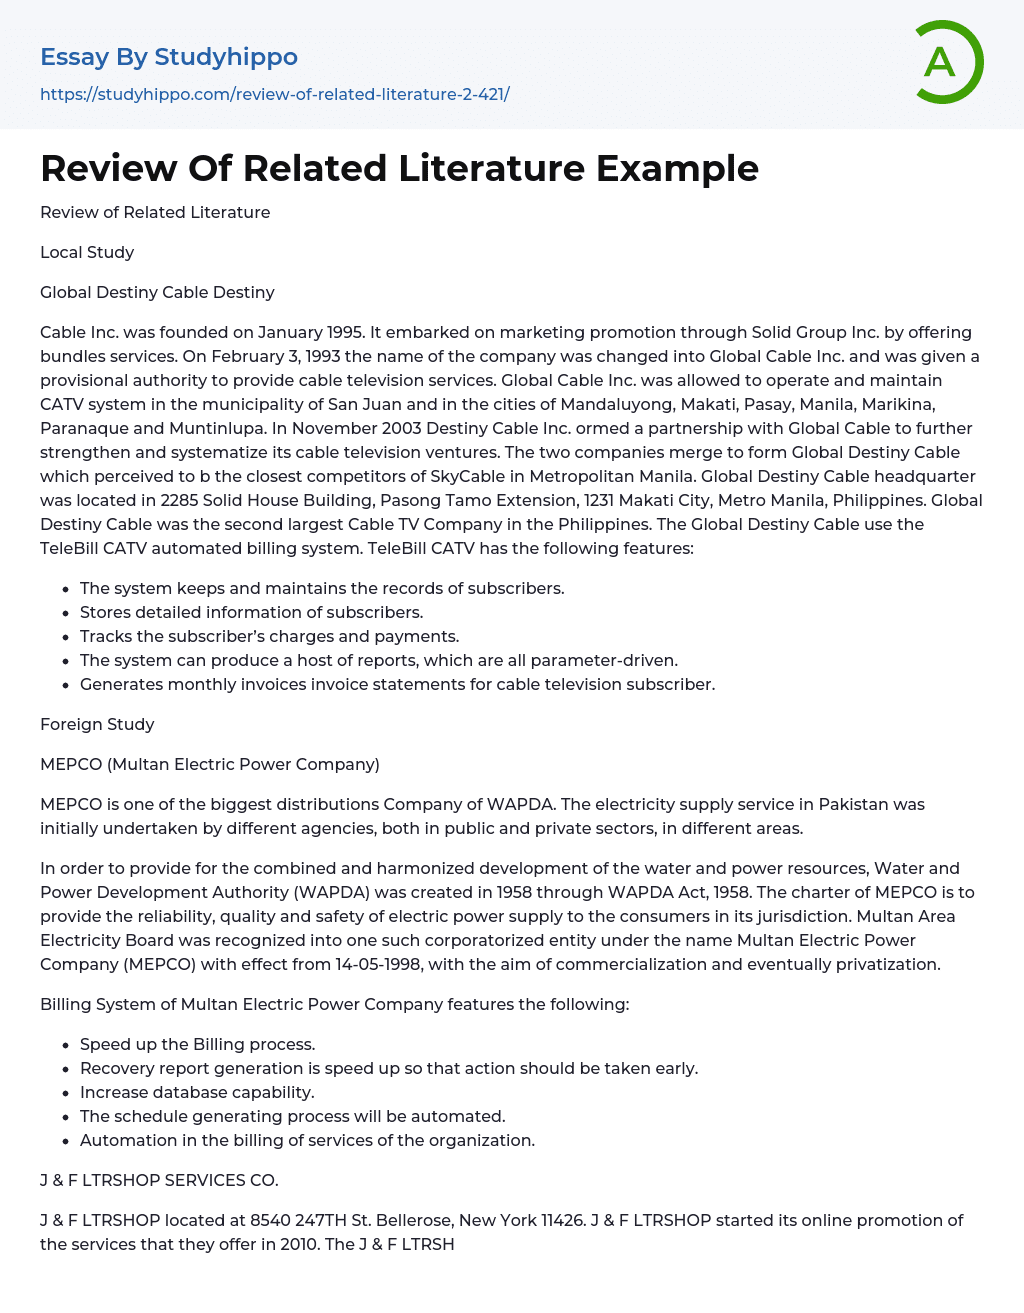 Review Of Related Literature Example Essay Example